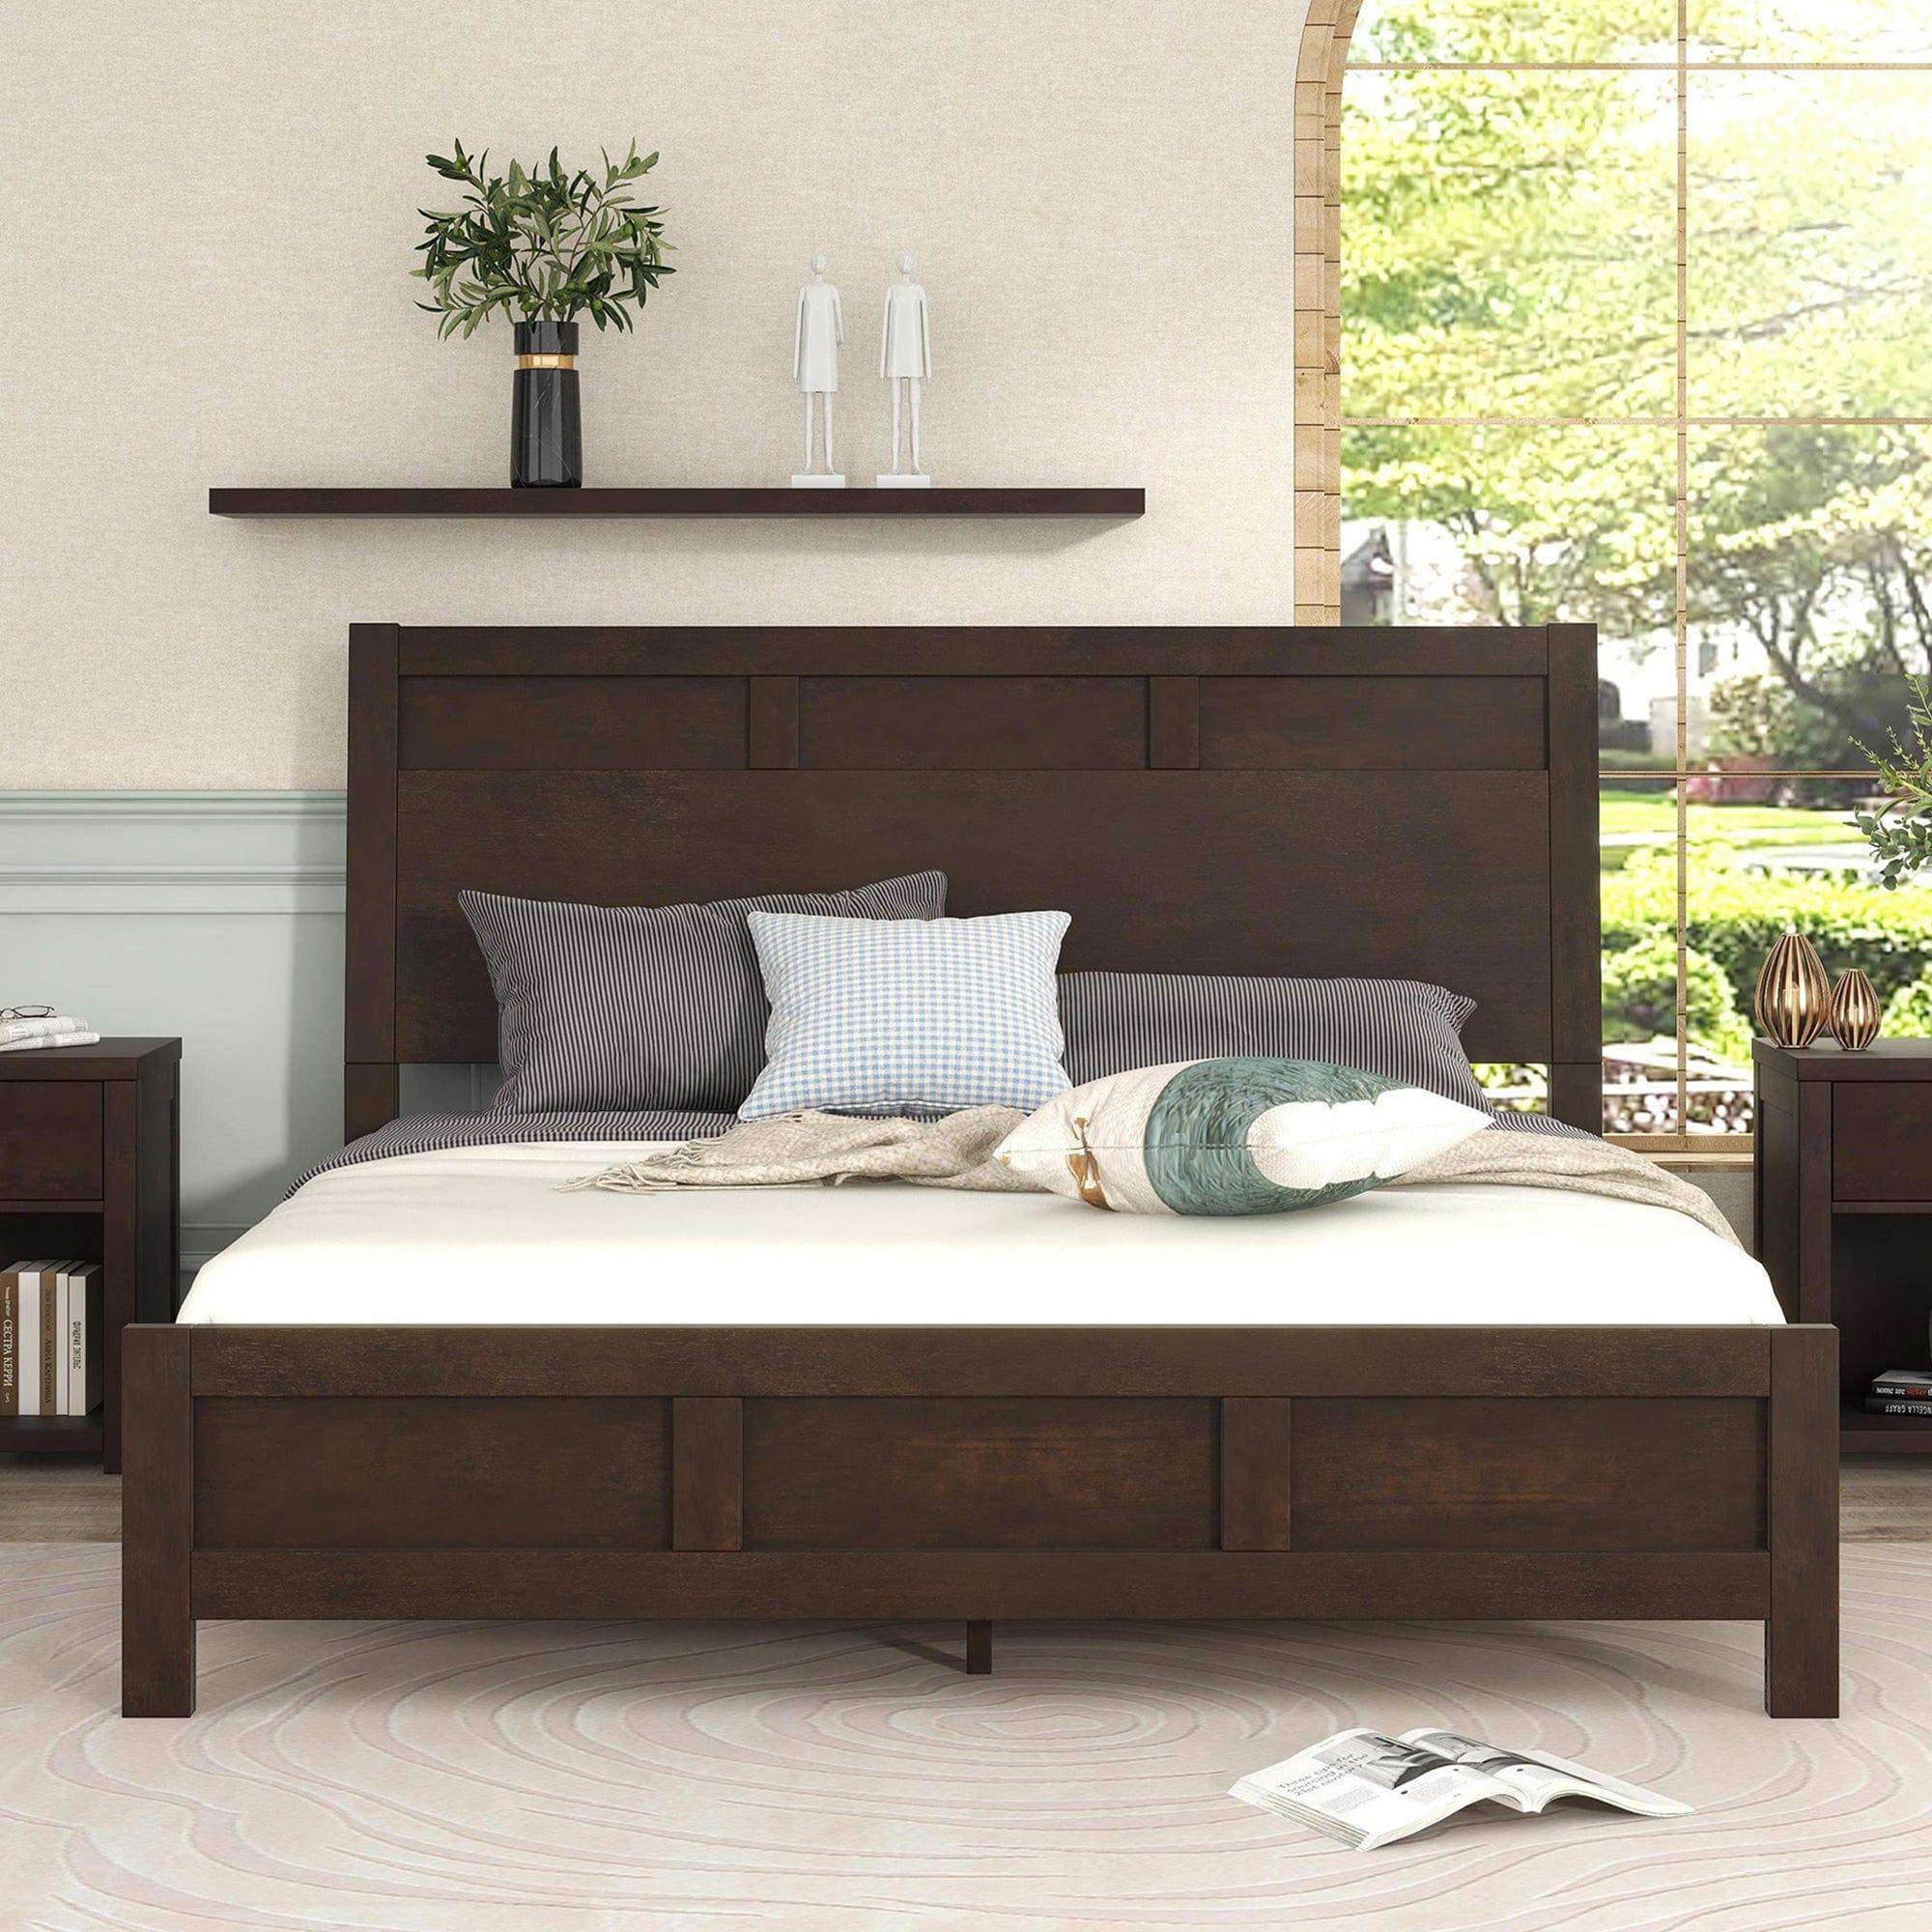 Shop Classic Rich Brown 3 Pieces King Bedroom Set (King Bed + Nightstand+ Dresser) Mademoiselle Home Decor